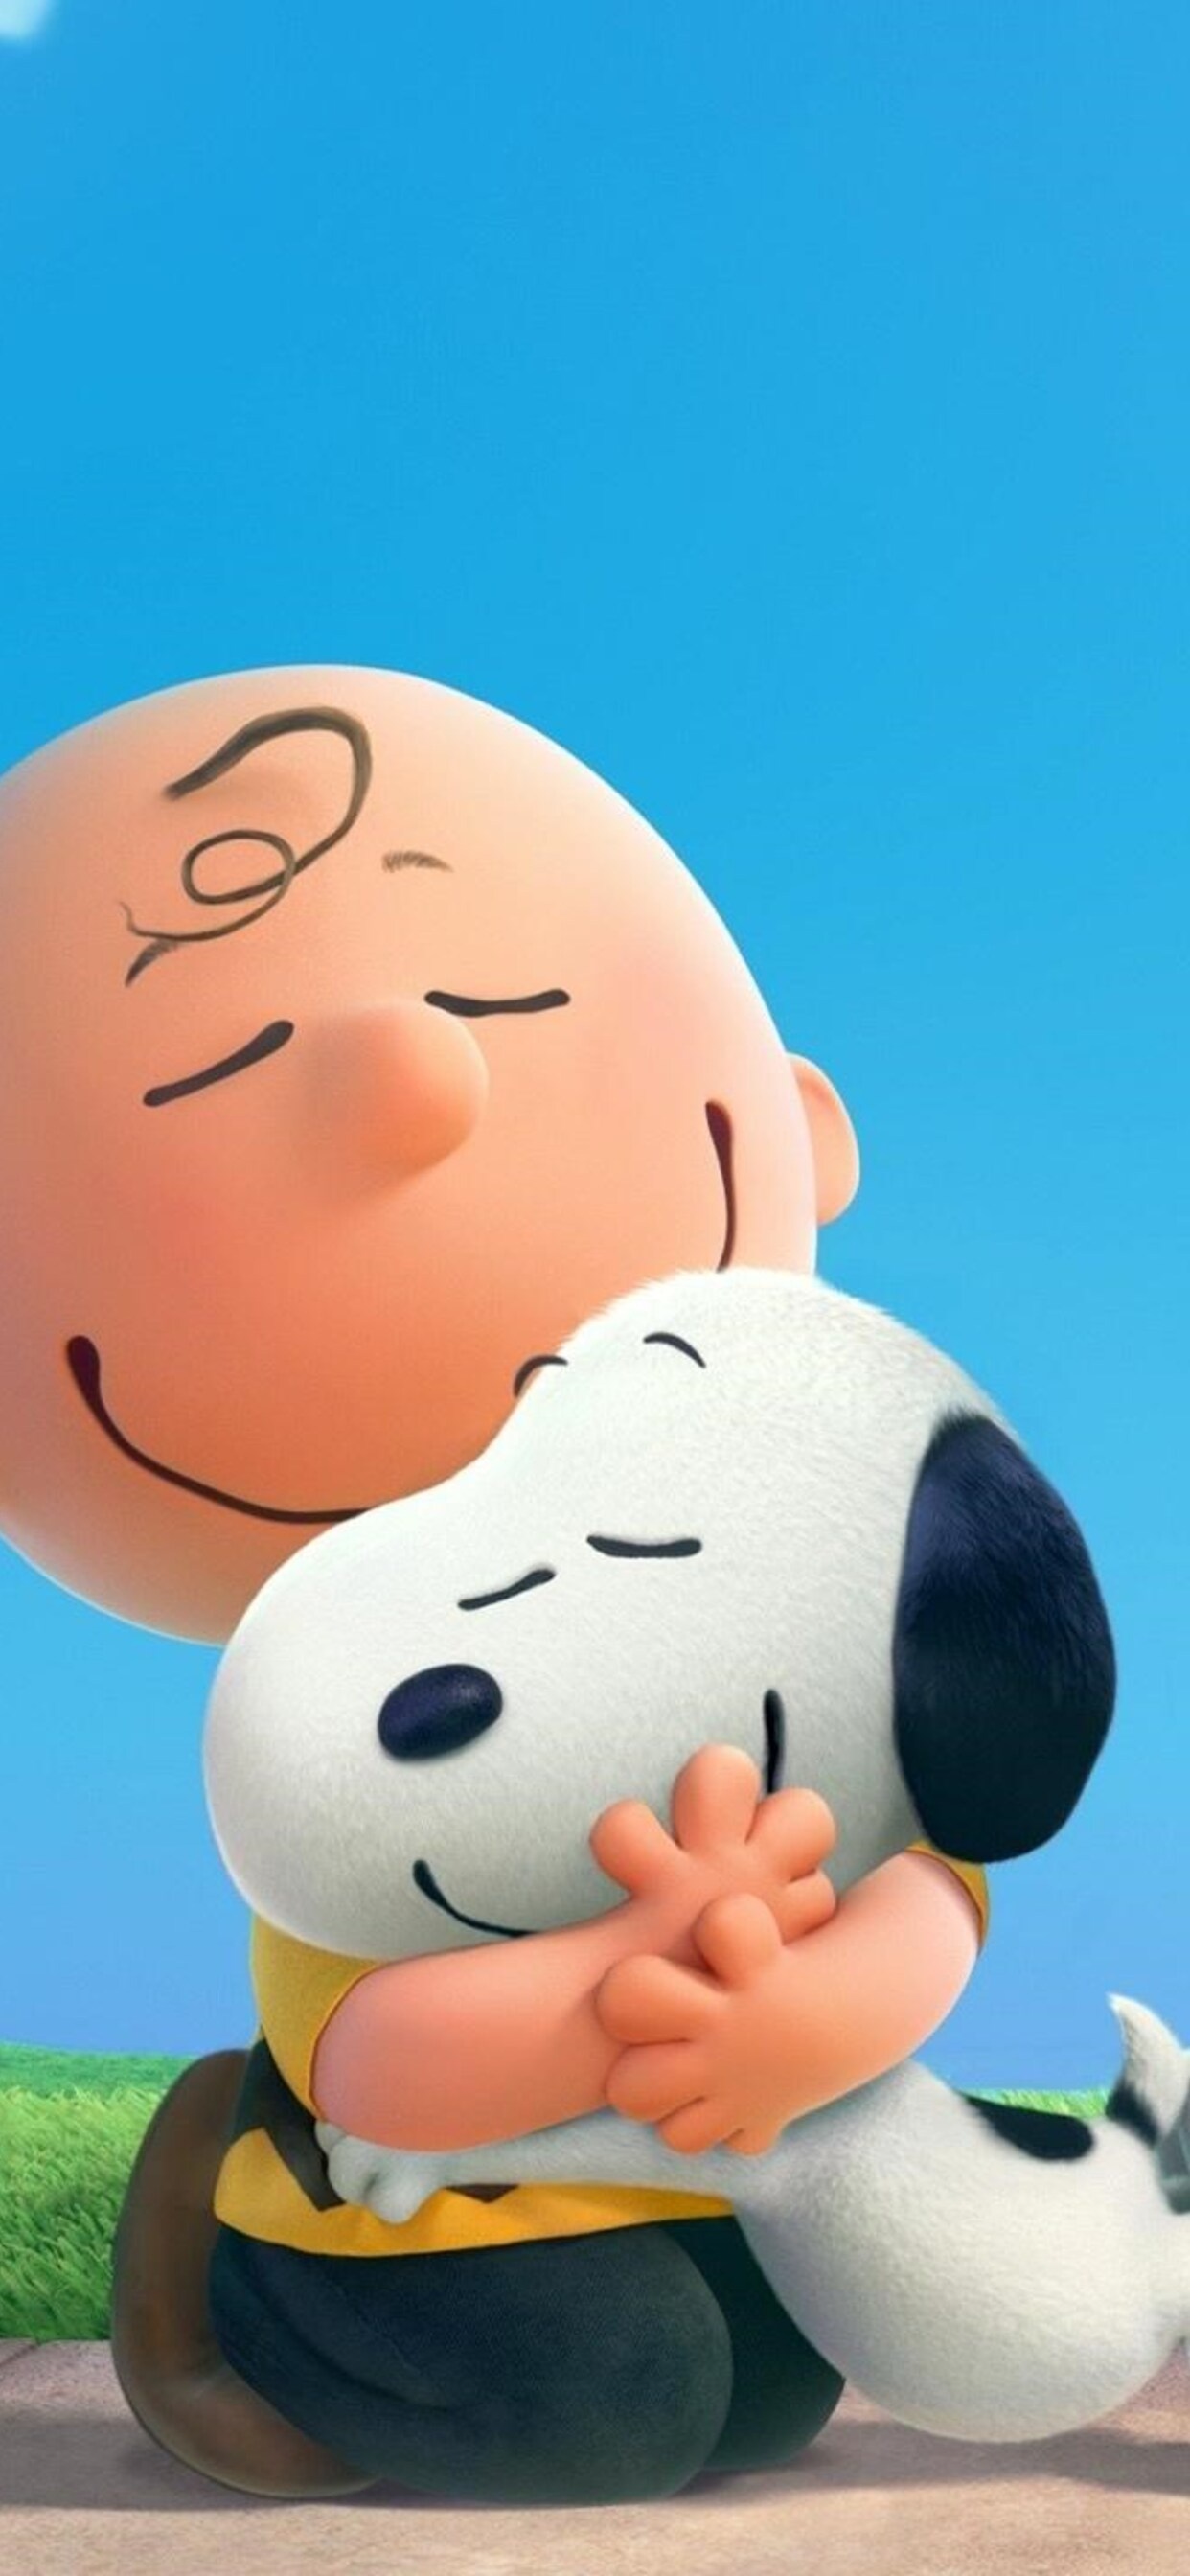 The Peanuts Movie, Charlie Brown/Snoopy wallpapers, Vibrant visuals, Childhood nostalgia, 1250x2690 HD Phone